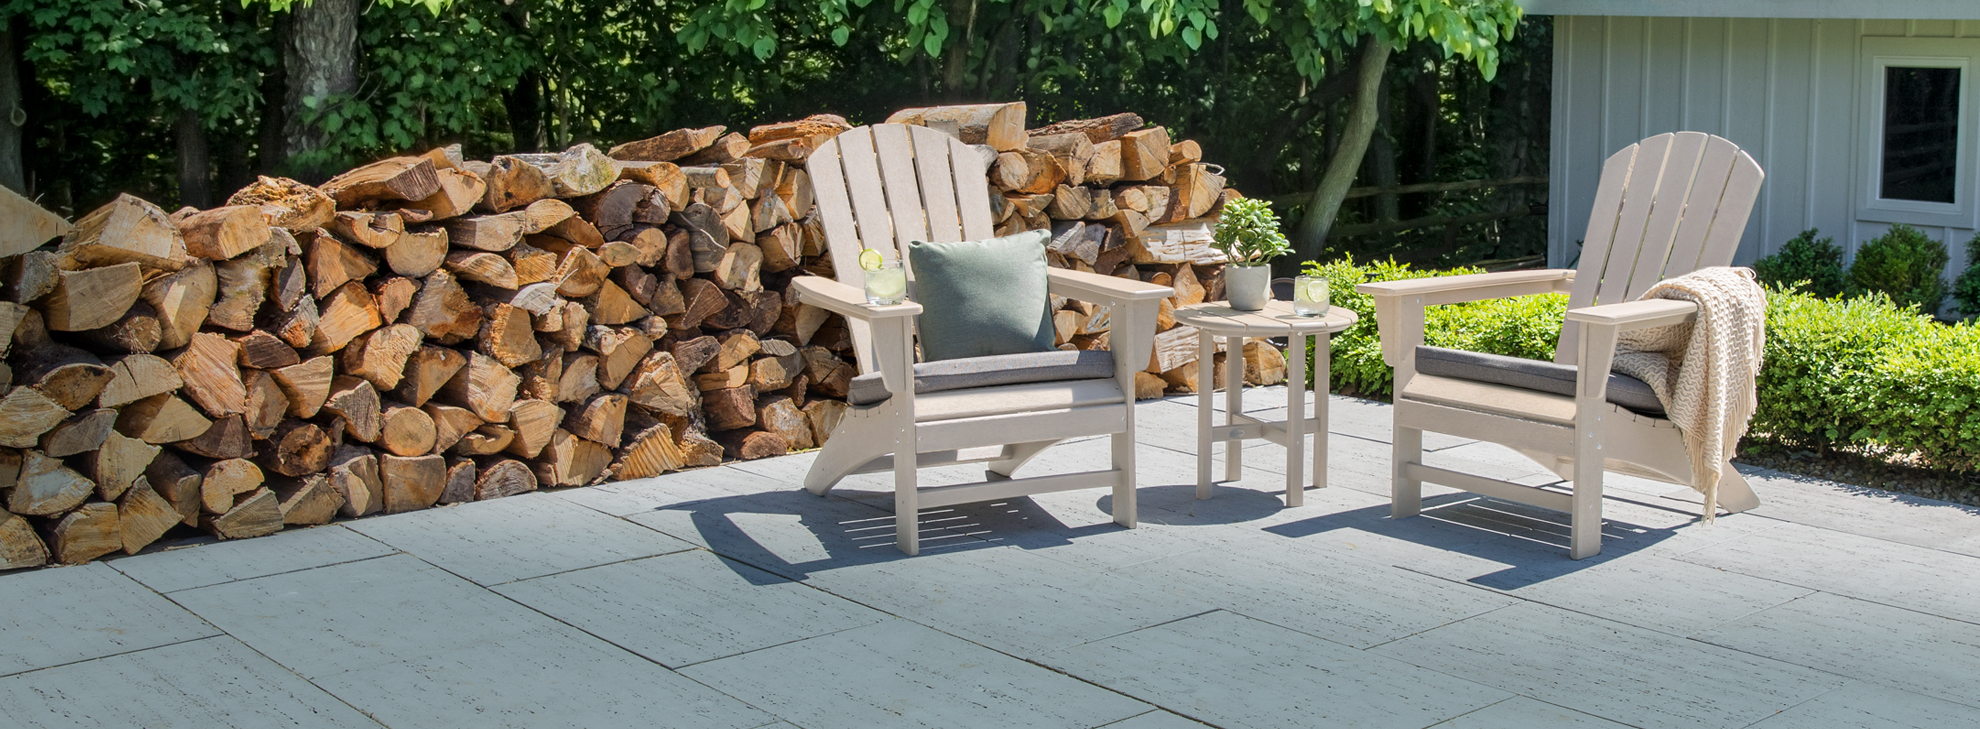 Best Selling Patio Furniture